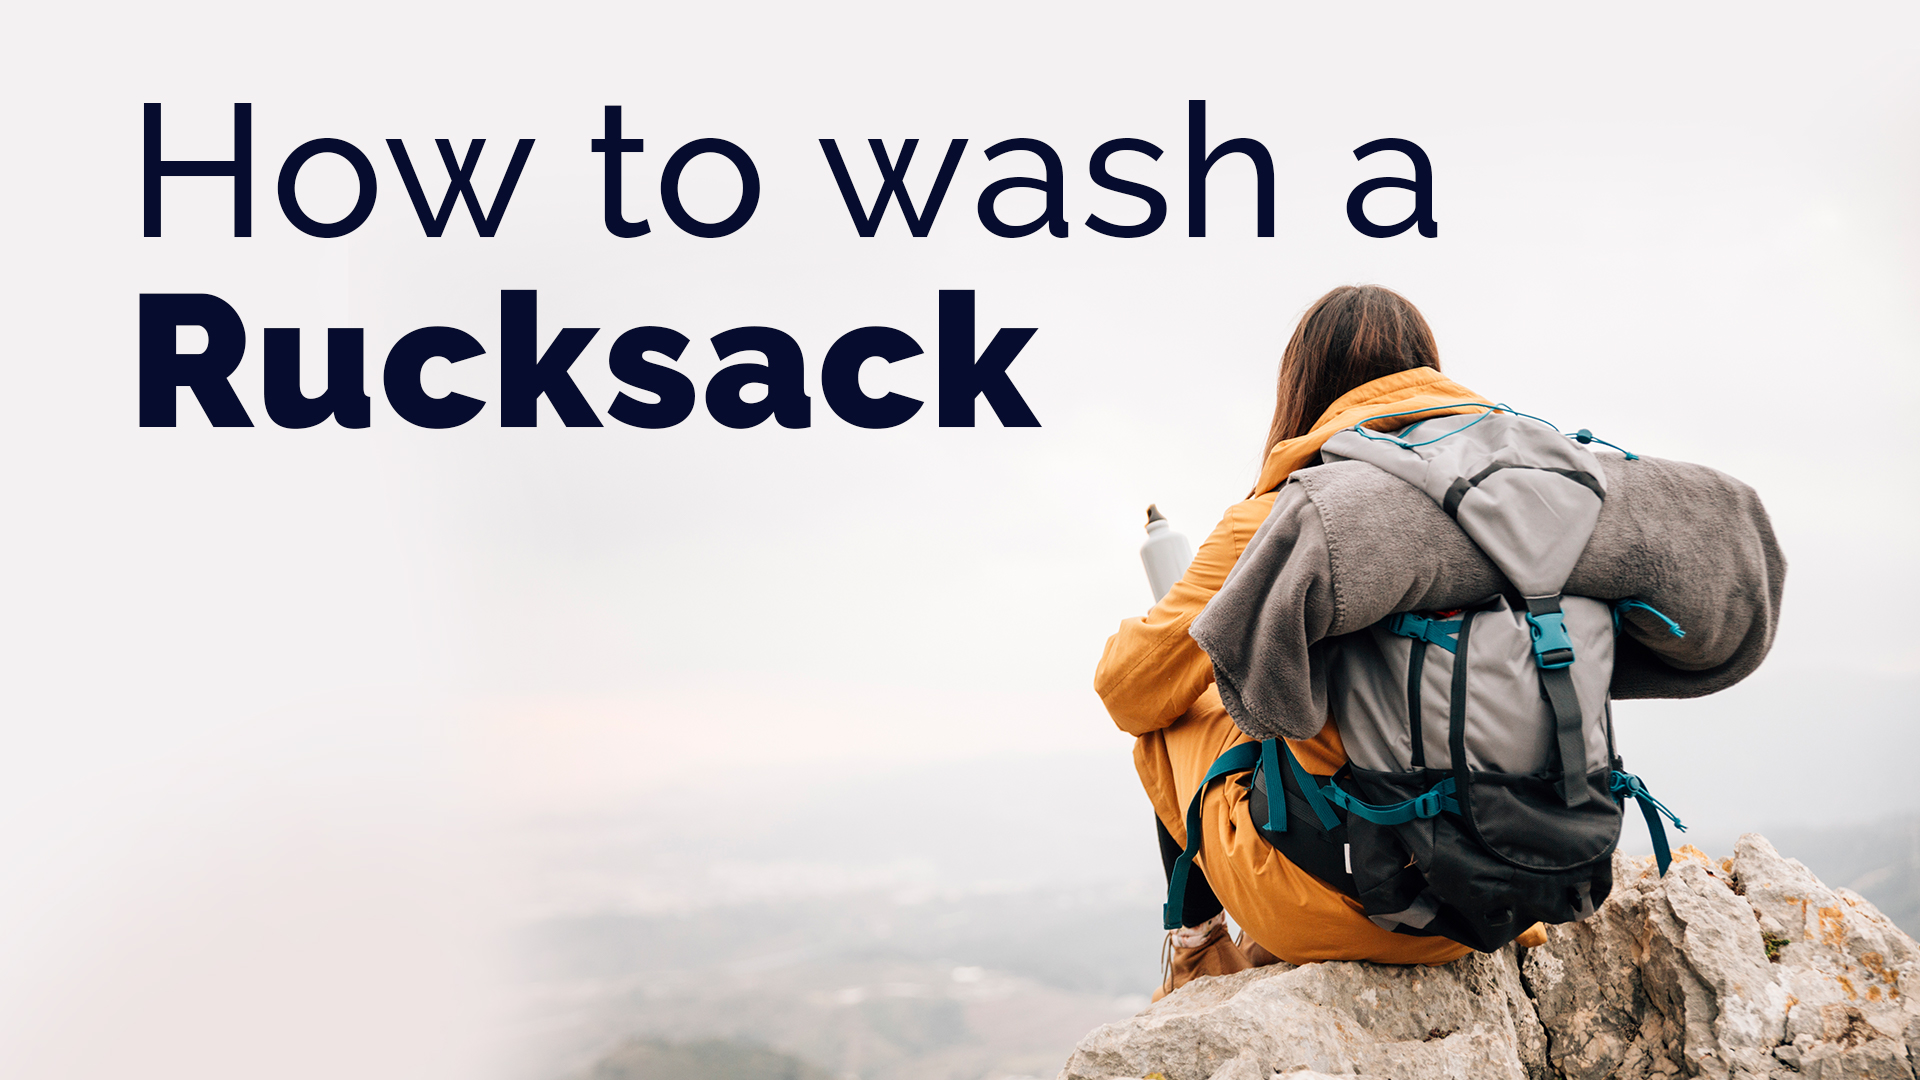 How to wash a rucksack